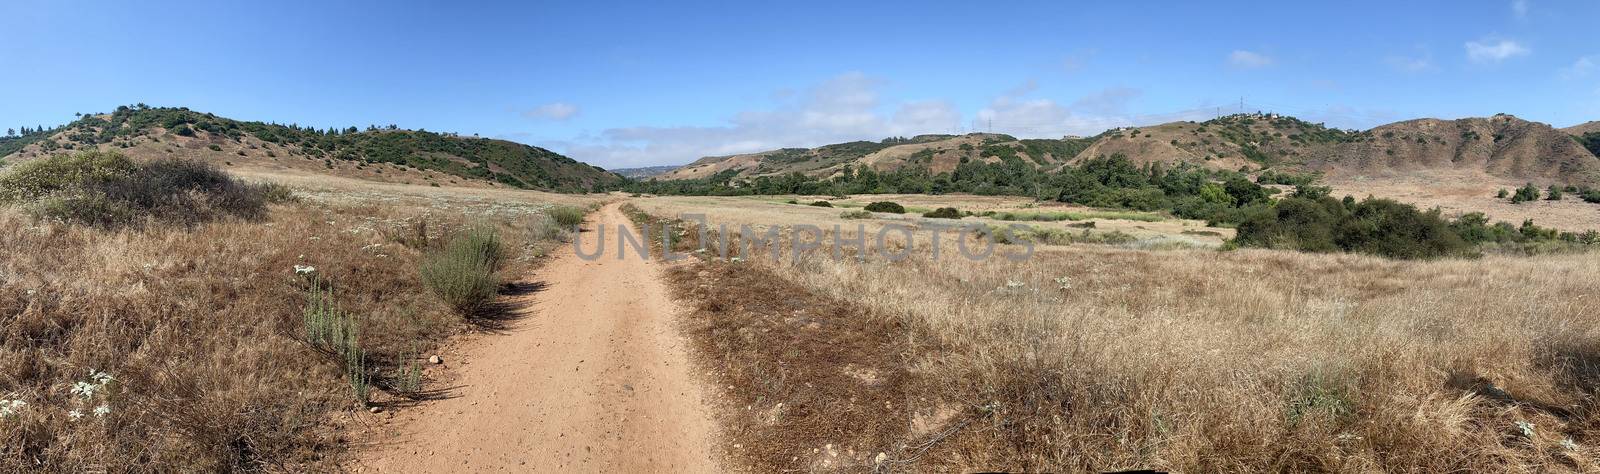 Panoramic view of small dry dusty trails in the valley by Bonandbon